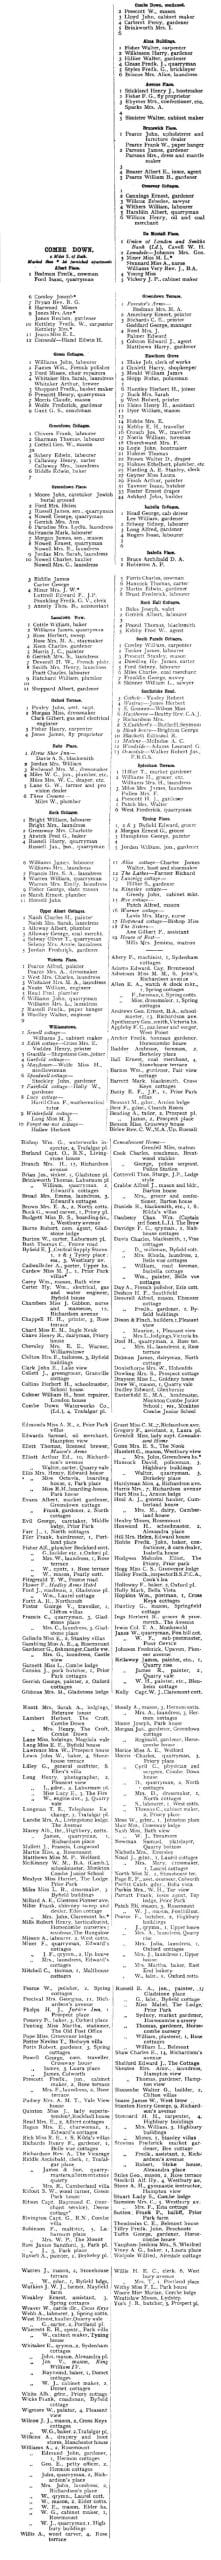 1911 Post Office Directory for Combe Down